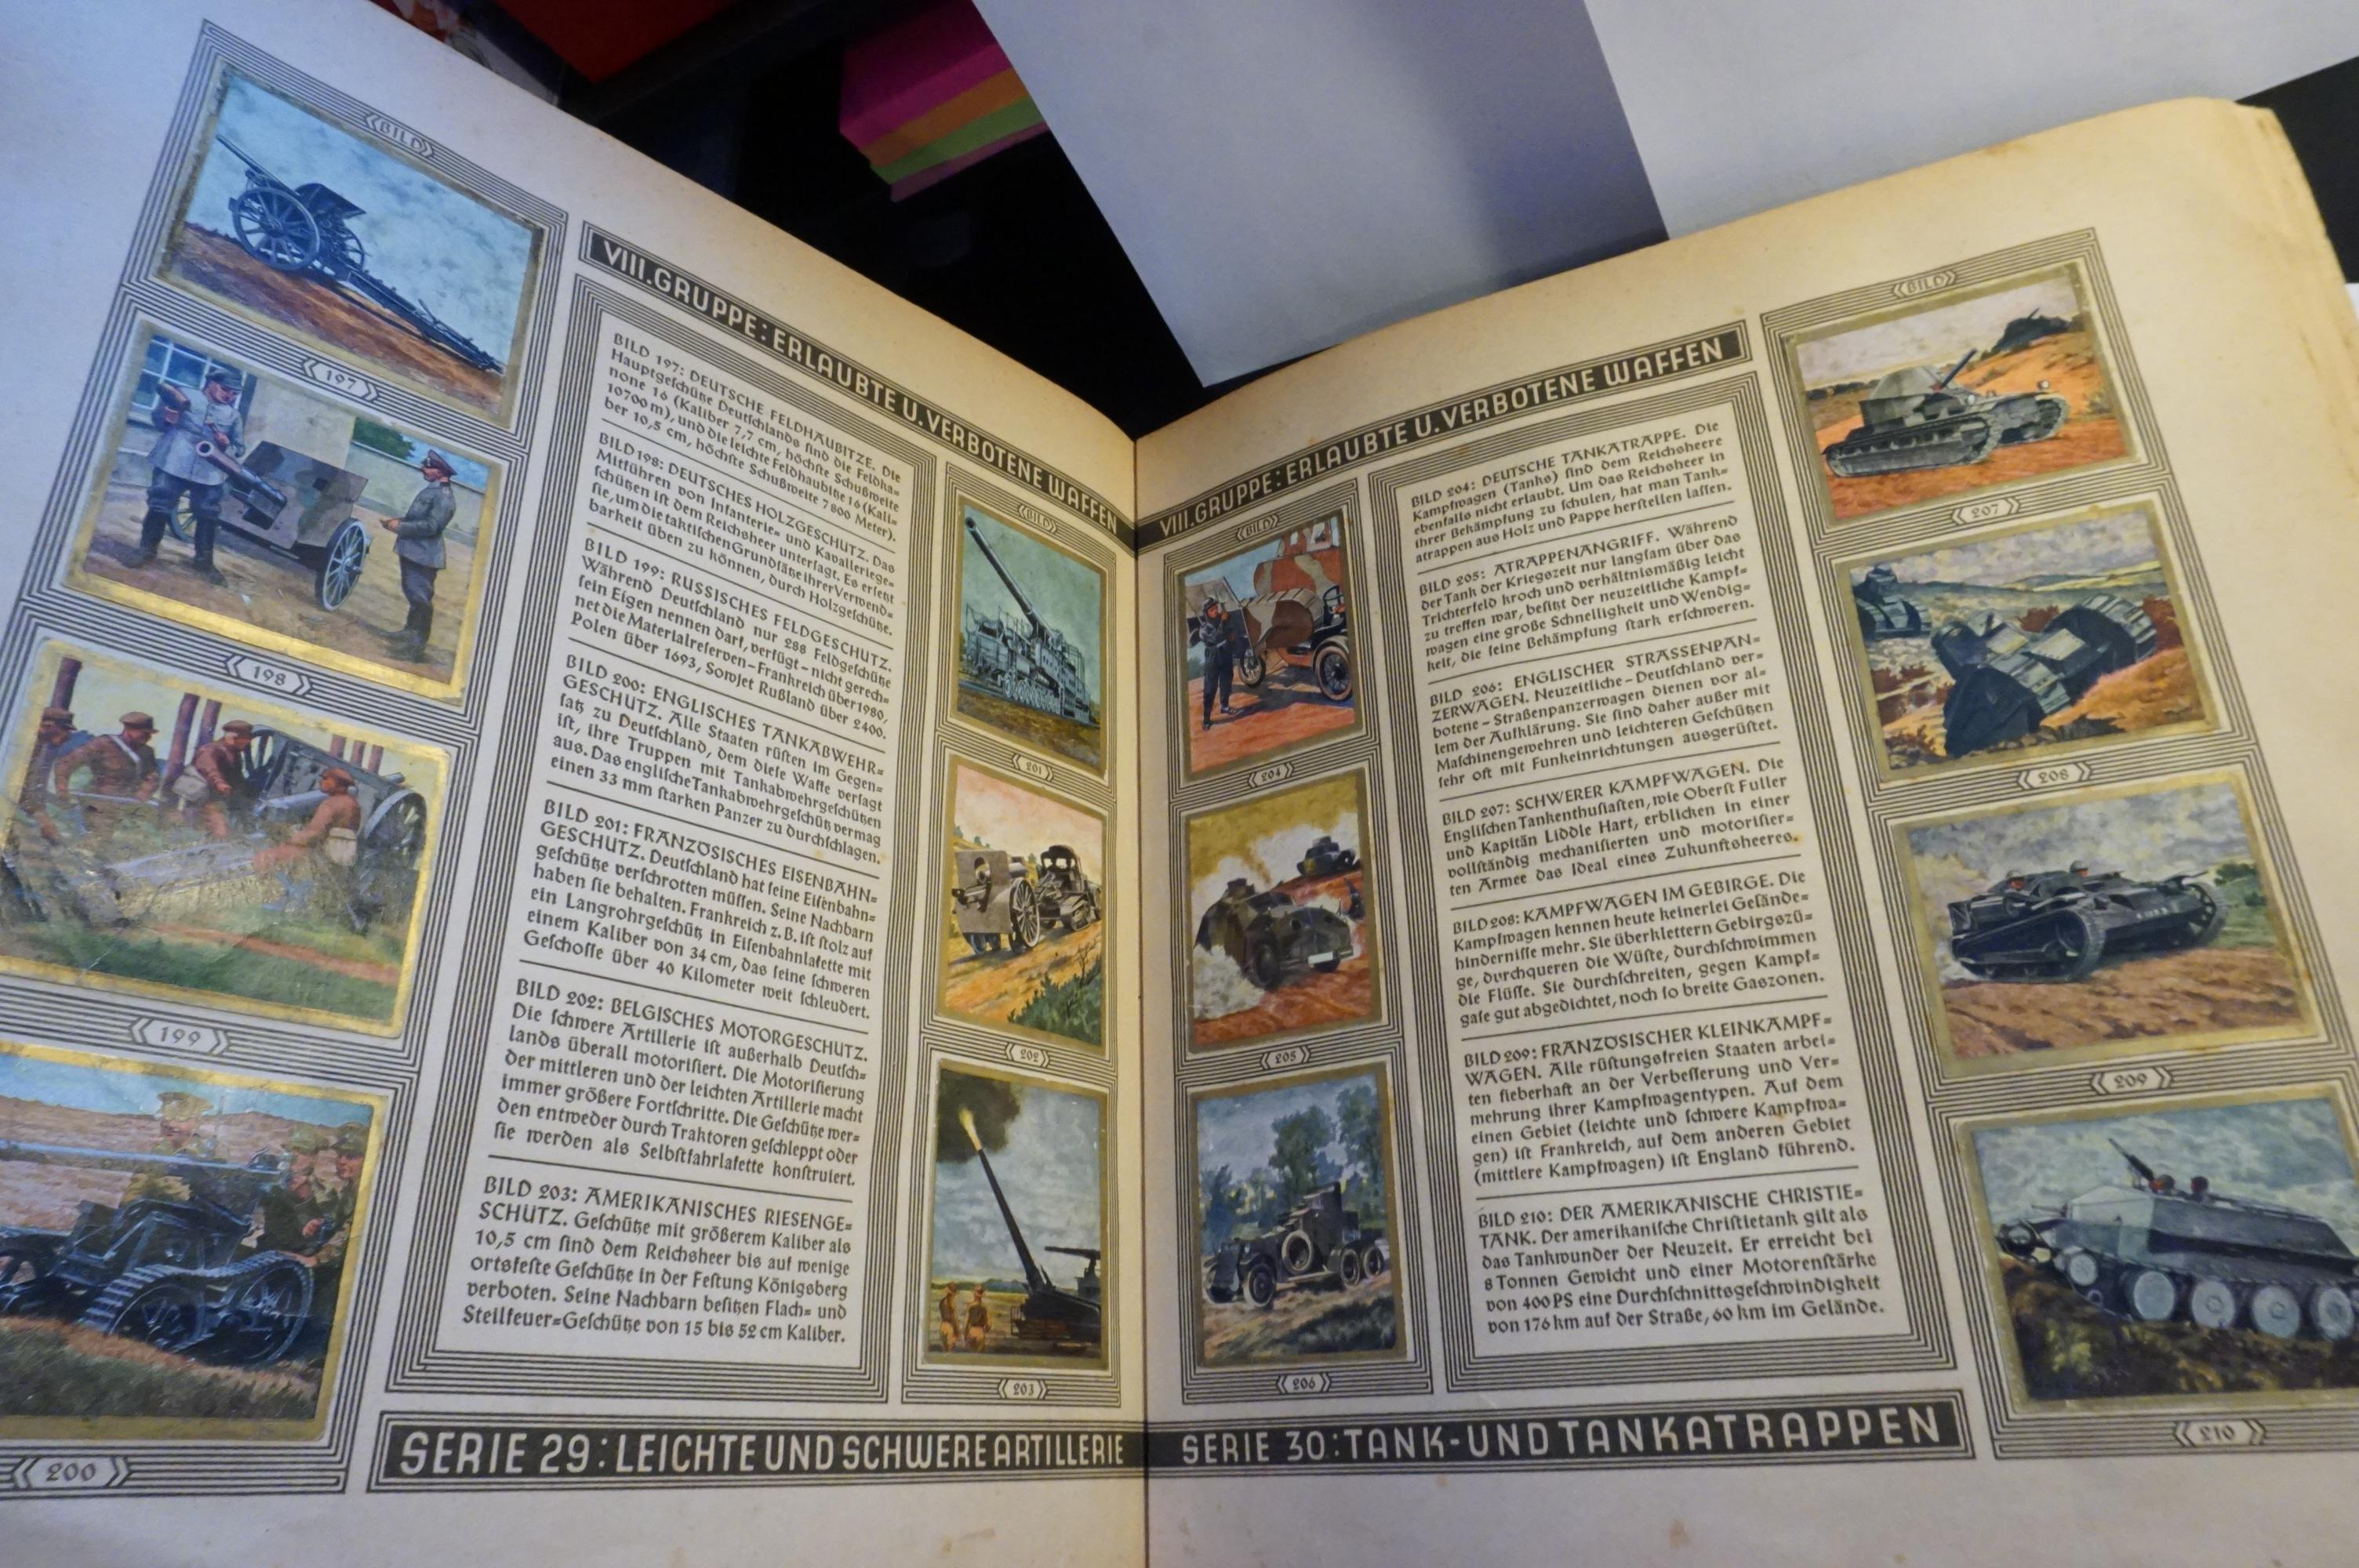 "Die Reichswehr" 1933 German Forces Cigarette Card Album (colored cards), Note: Some Damage to